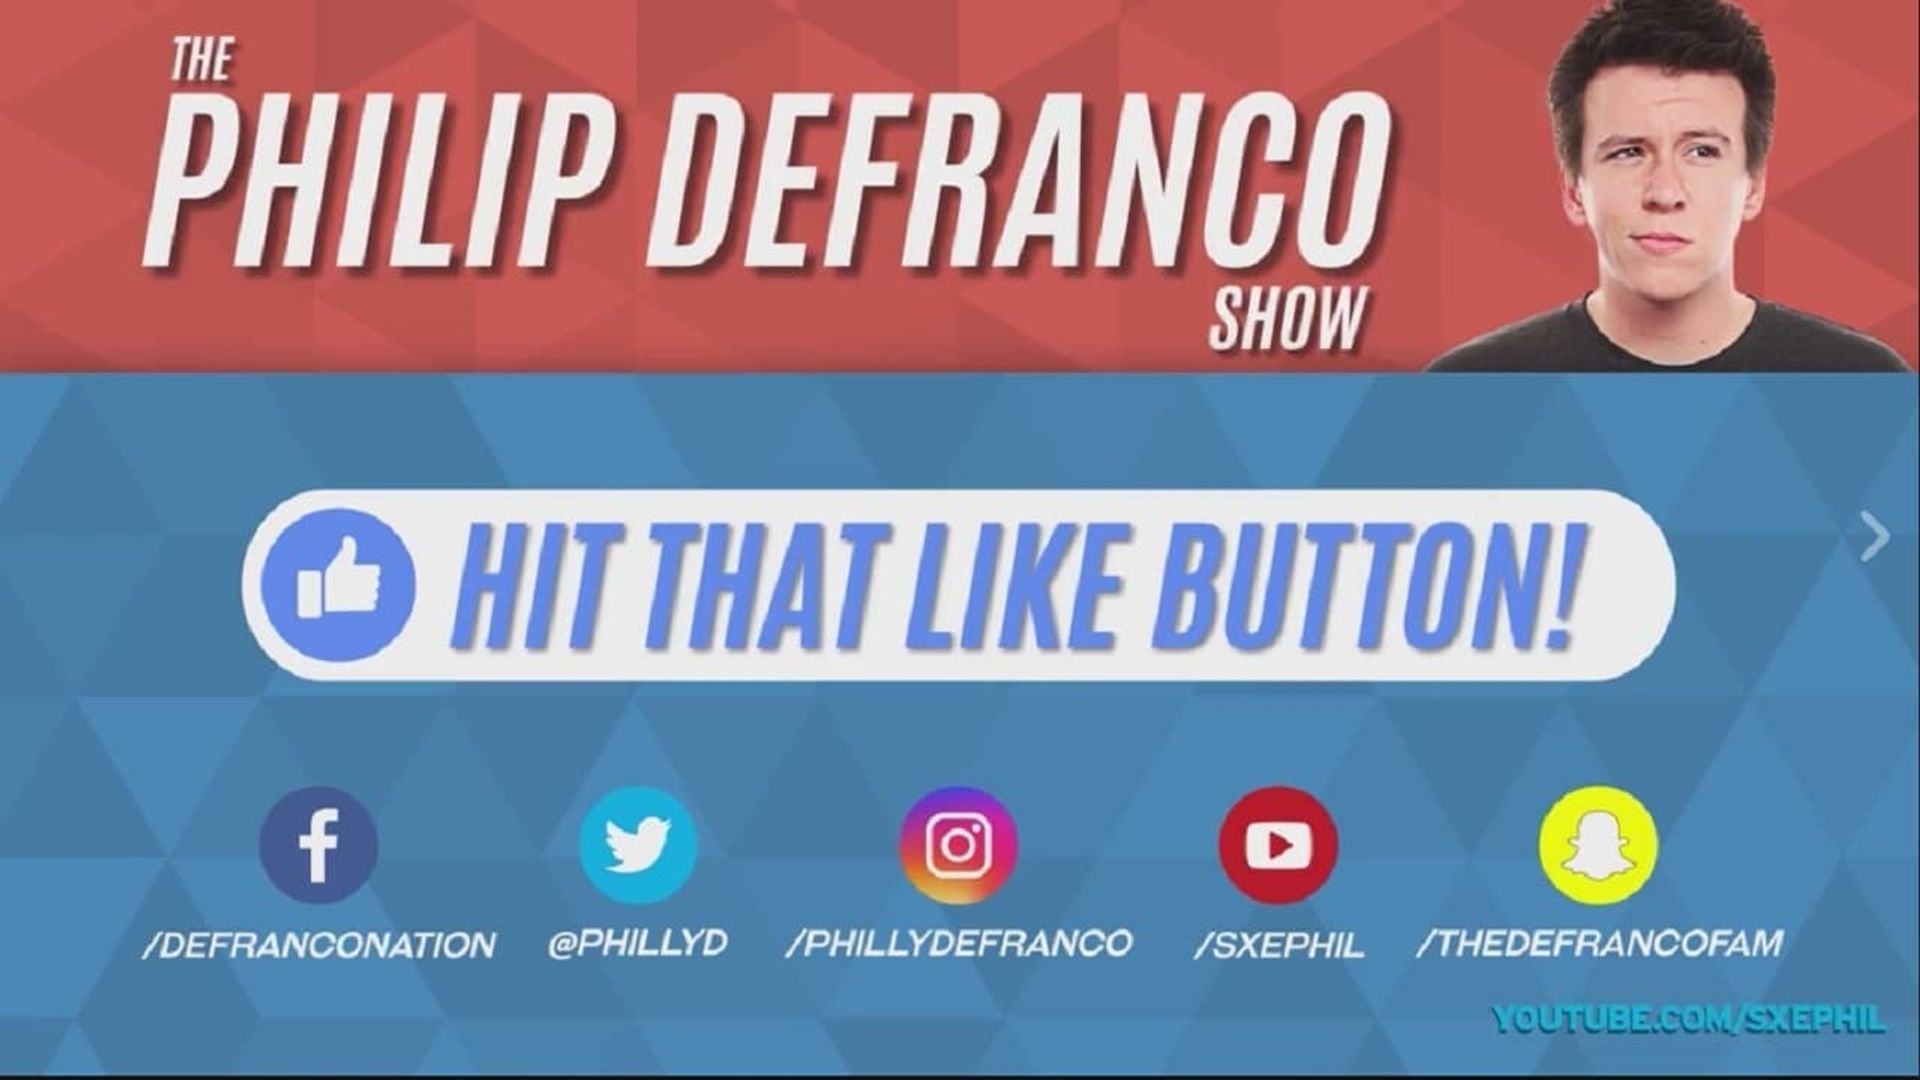 The Philip DeFranco Show background